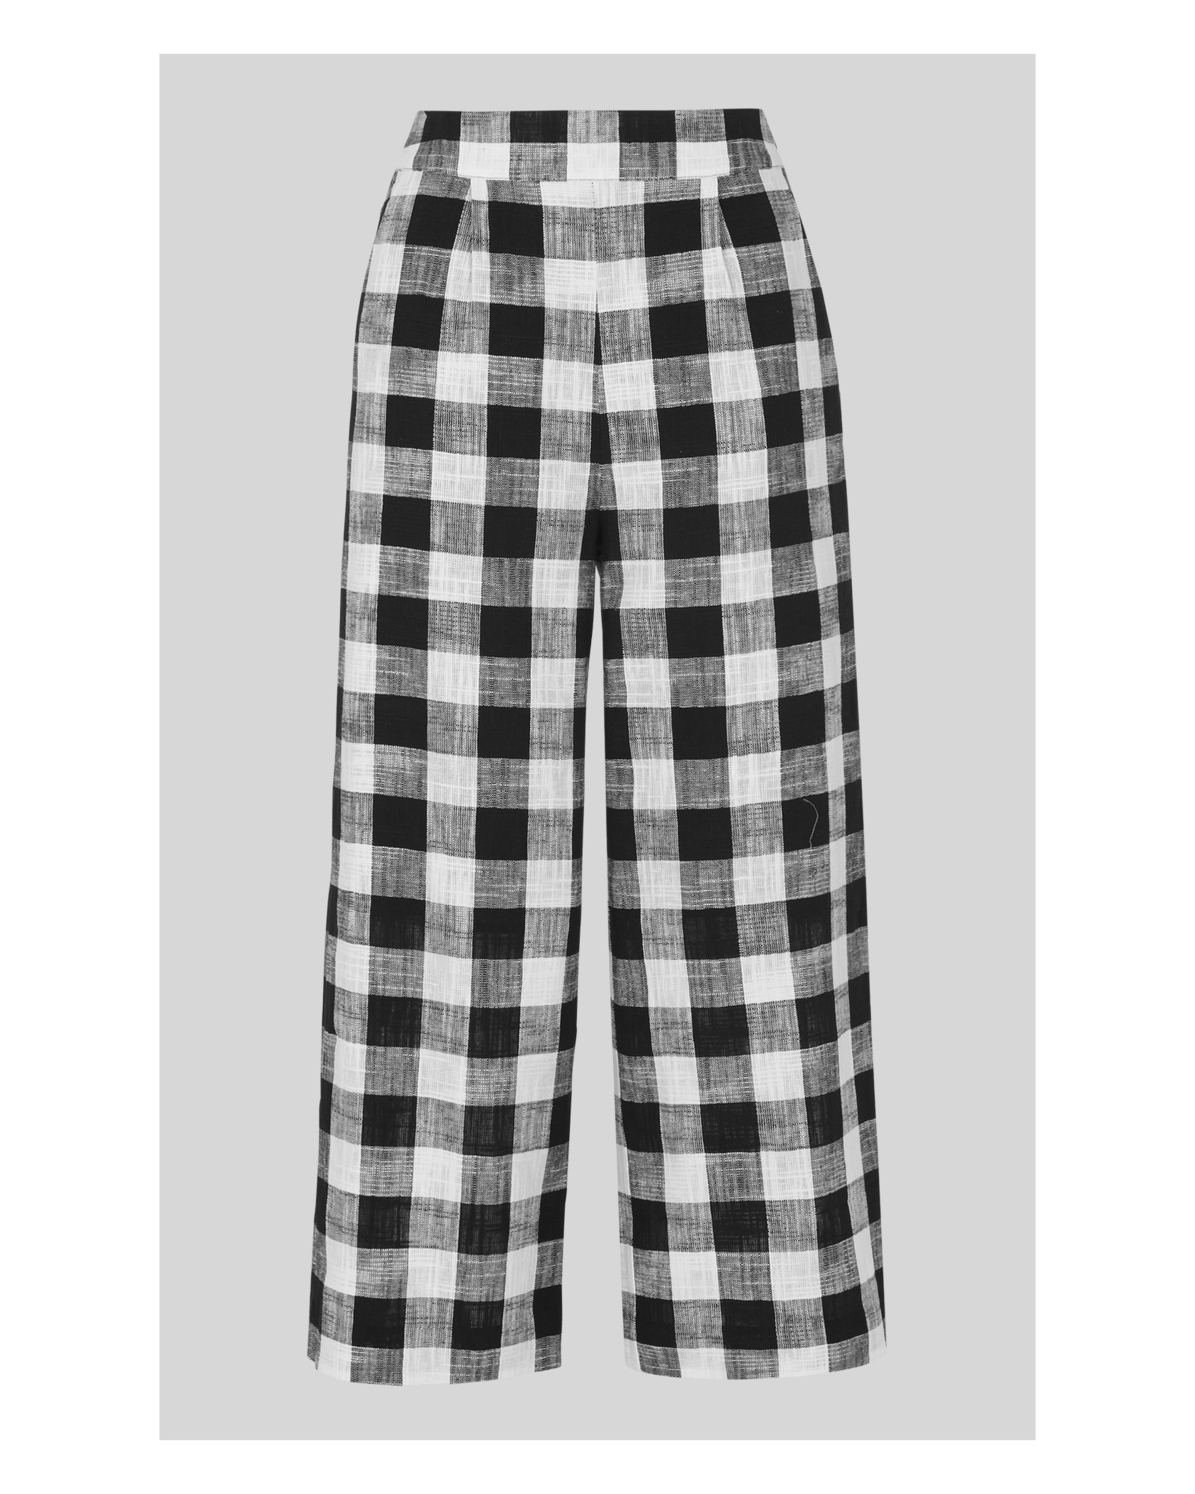 WHISTLES Gingham Trouser in Black and White